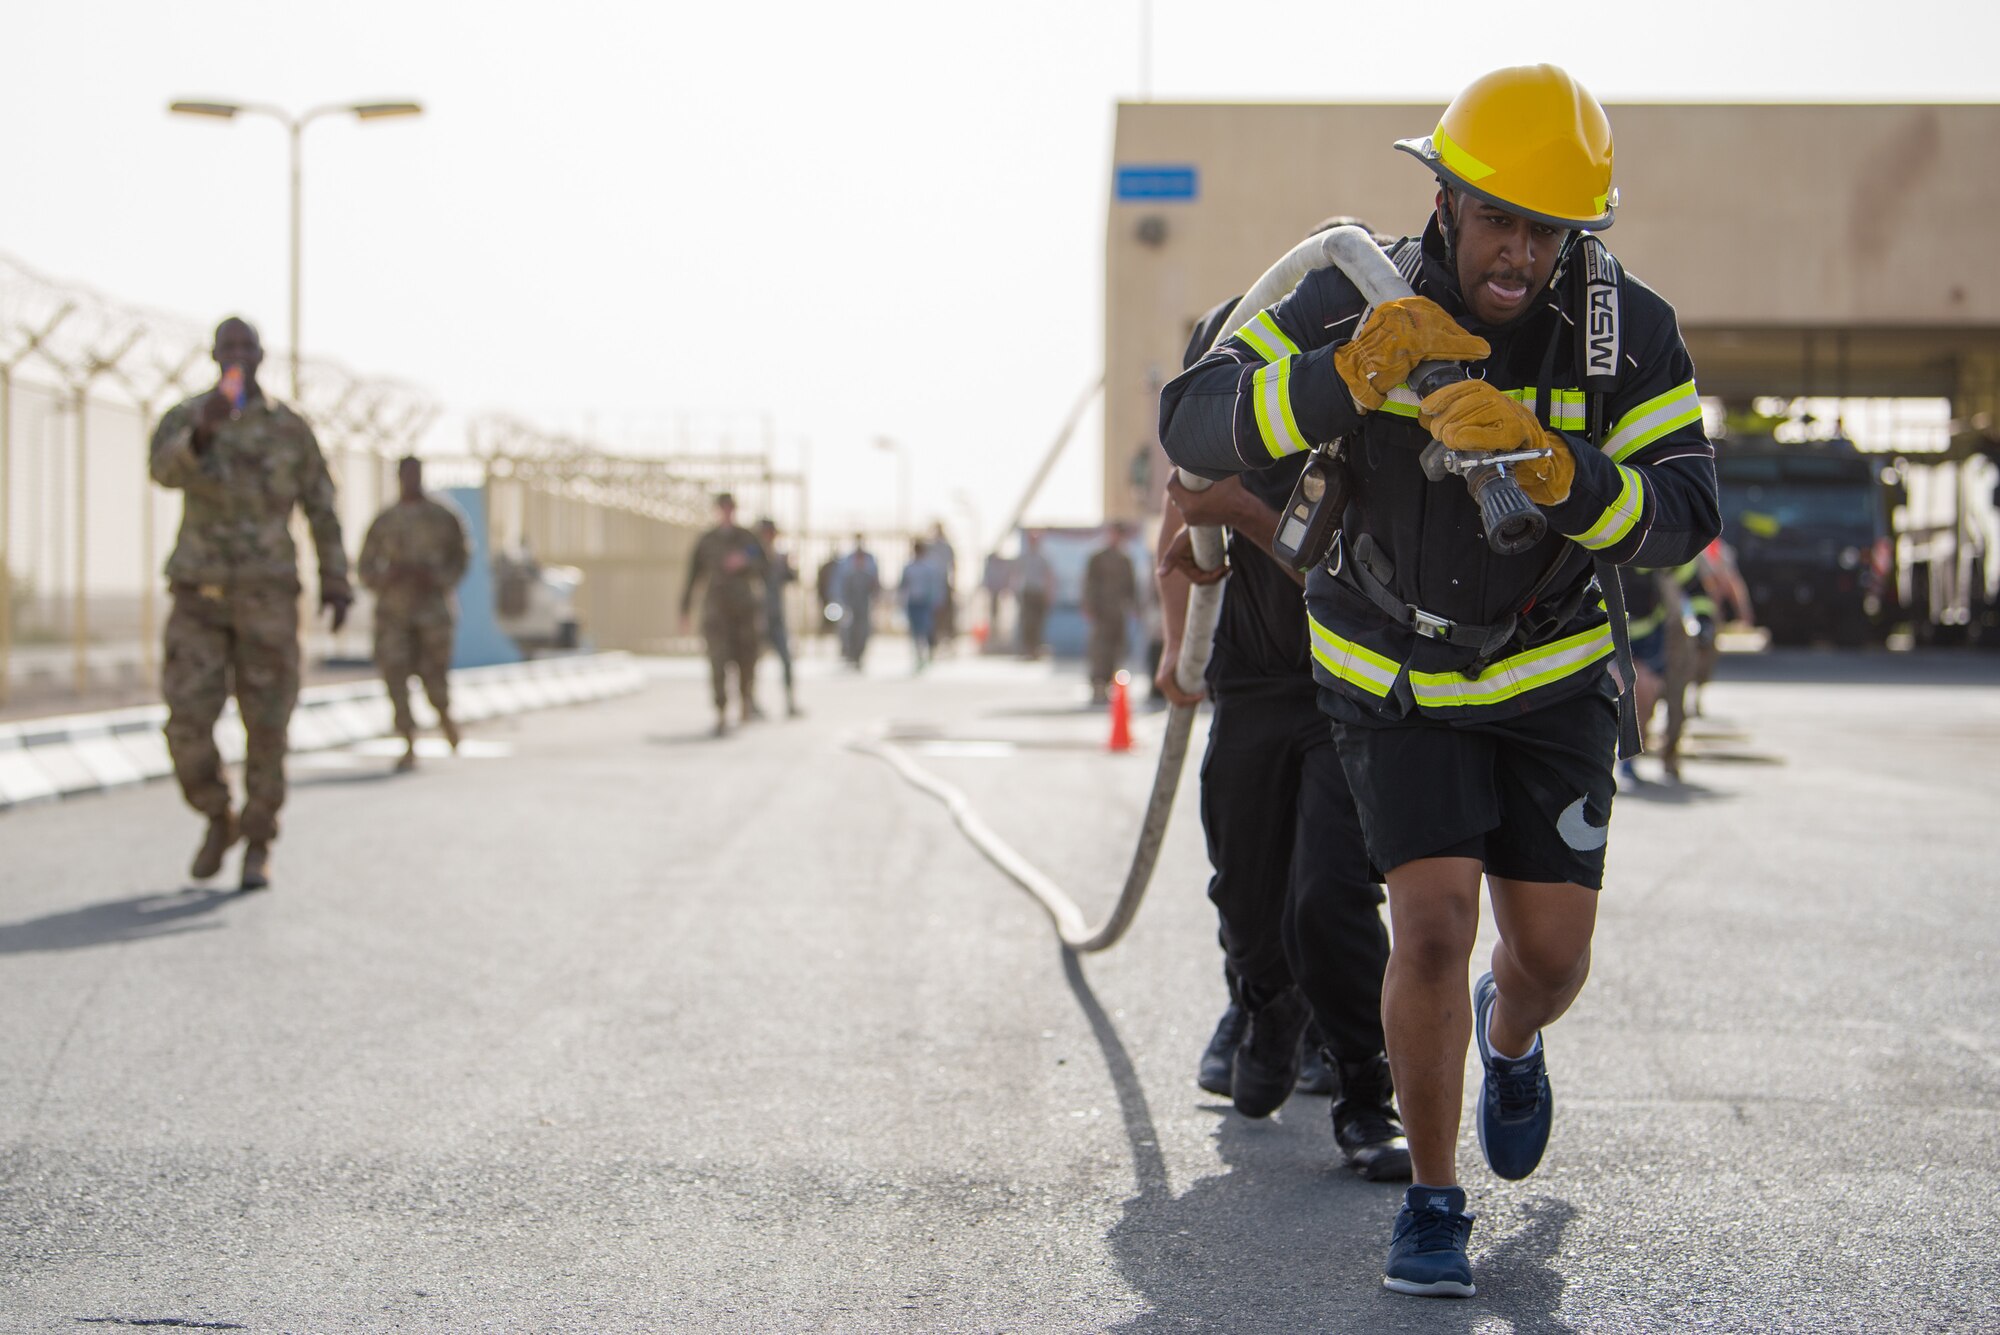 Members of the 379th Air Expeditionary Wing and Qatar Emiri Air Force participate in a firefighter challenge exercise at Al Udeid Air Base, Qatar, March 8, 2018. The a exercise, a strenuous course designed to test physical fitness and fire response capabilities, was organized by firefighters from the 379th ECES and Qatar Emiri Air Force. (U.S. Air Force photo by Staff Sgt. Joshua Horton)